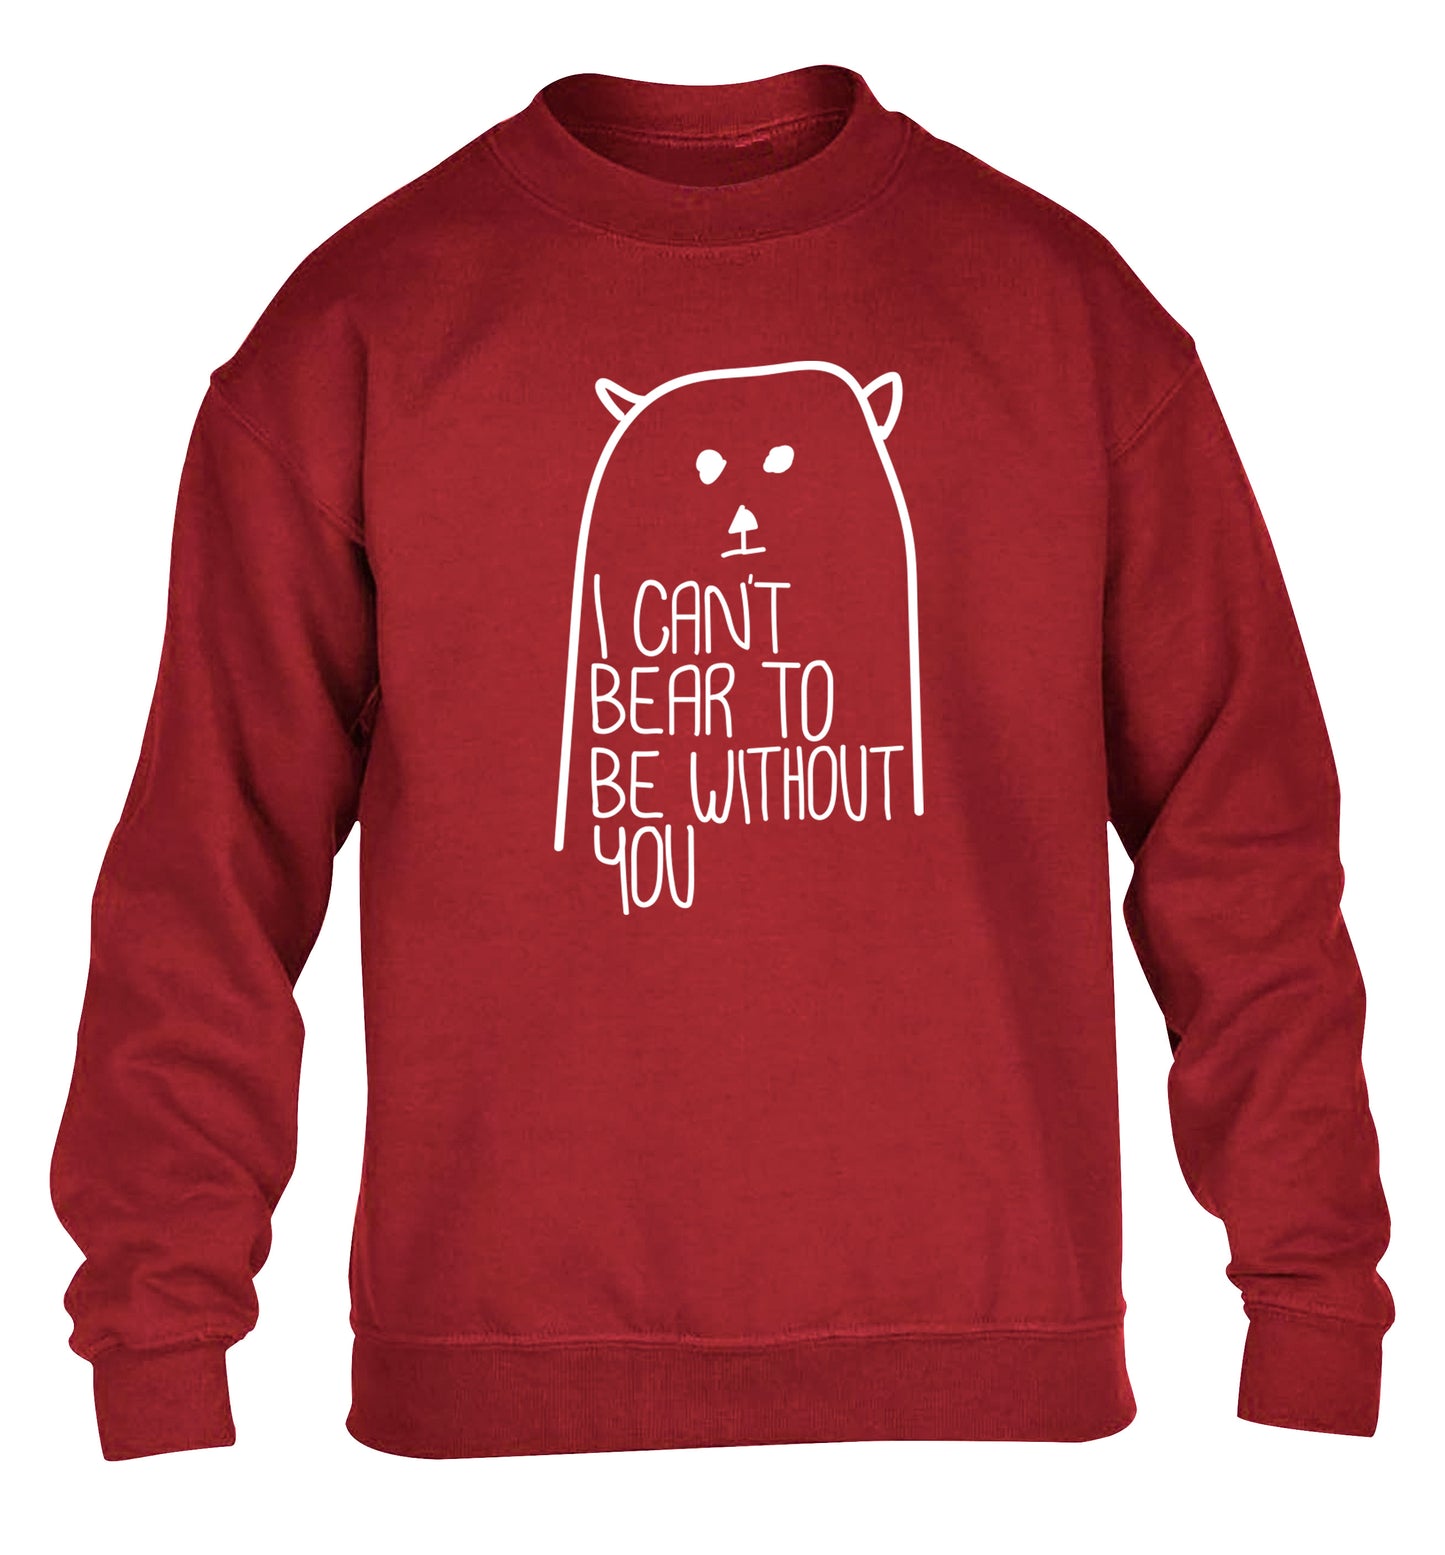 I can't bear to be without you children's grey sweater 12-13 Years